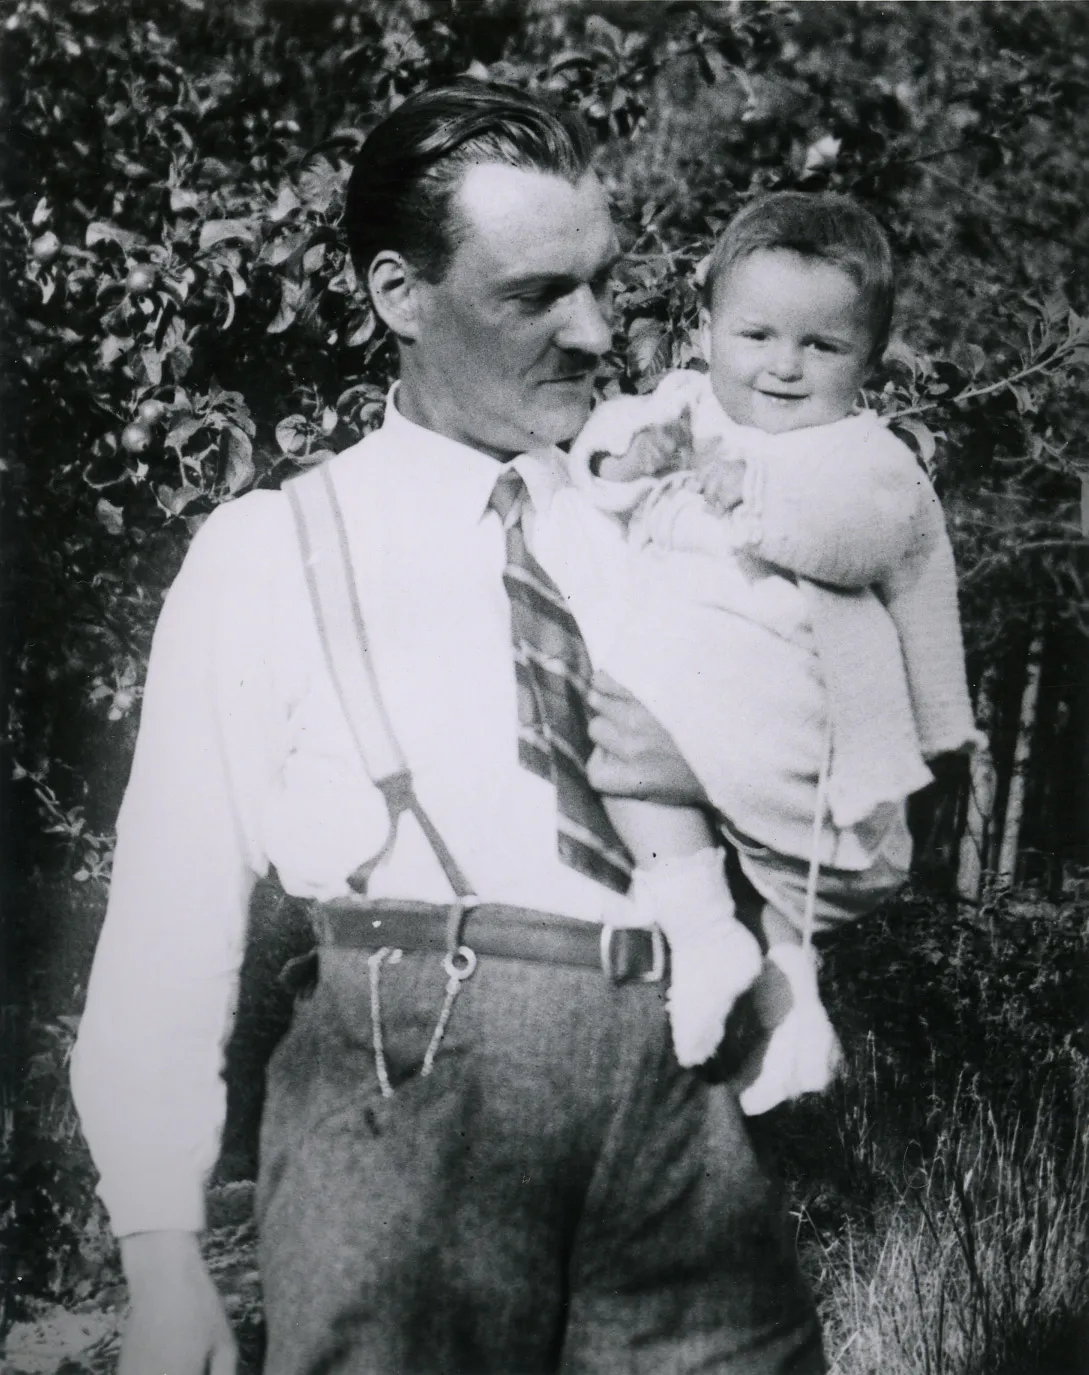 A man wearing a tie and suspenders holds a small girl.